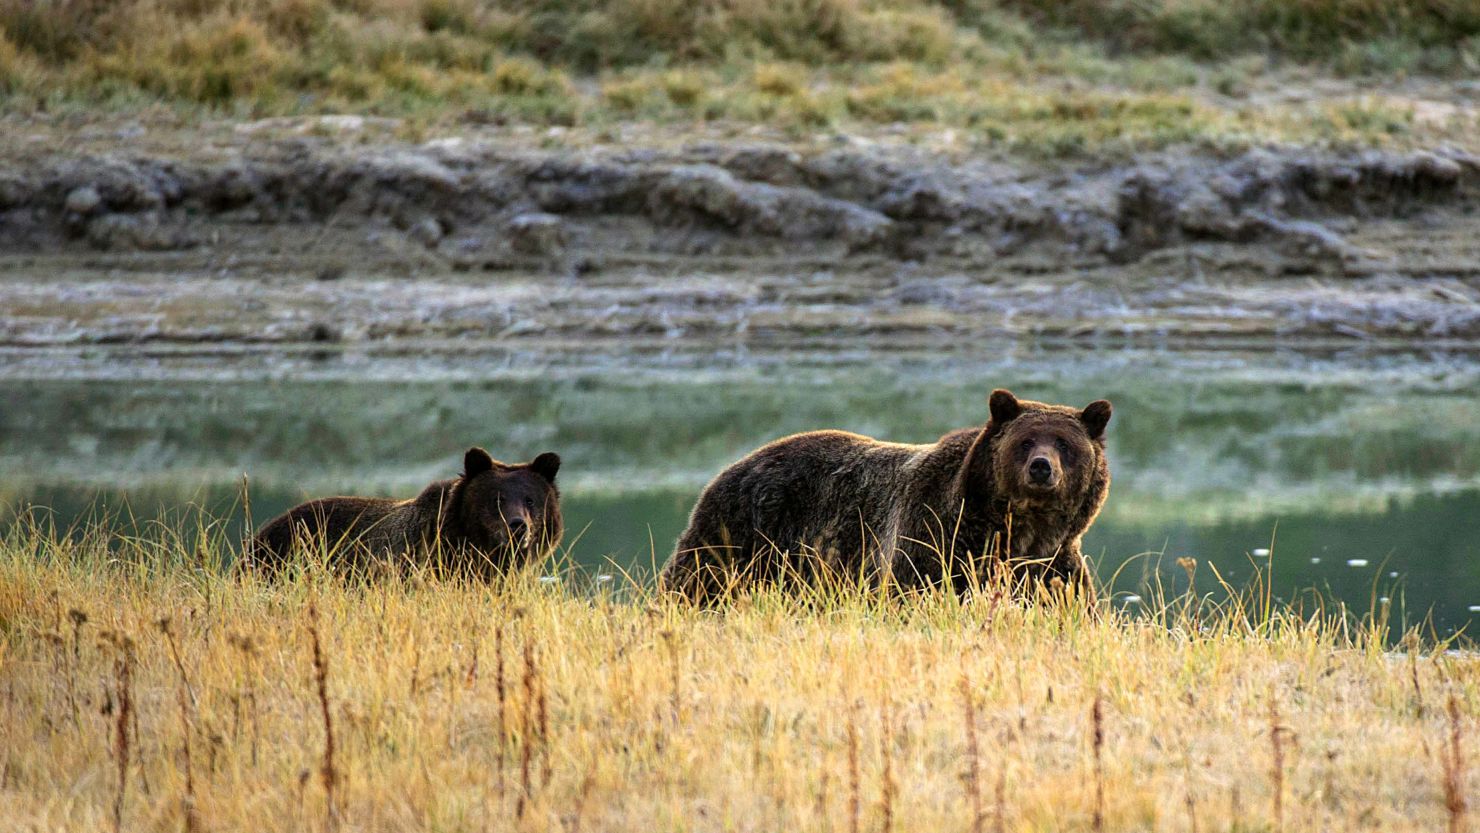 There are more than 500 grizzly bears in Yellowstone National Park. 